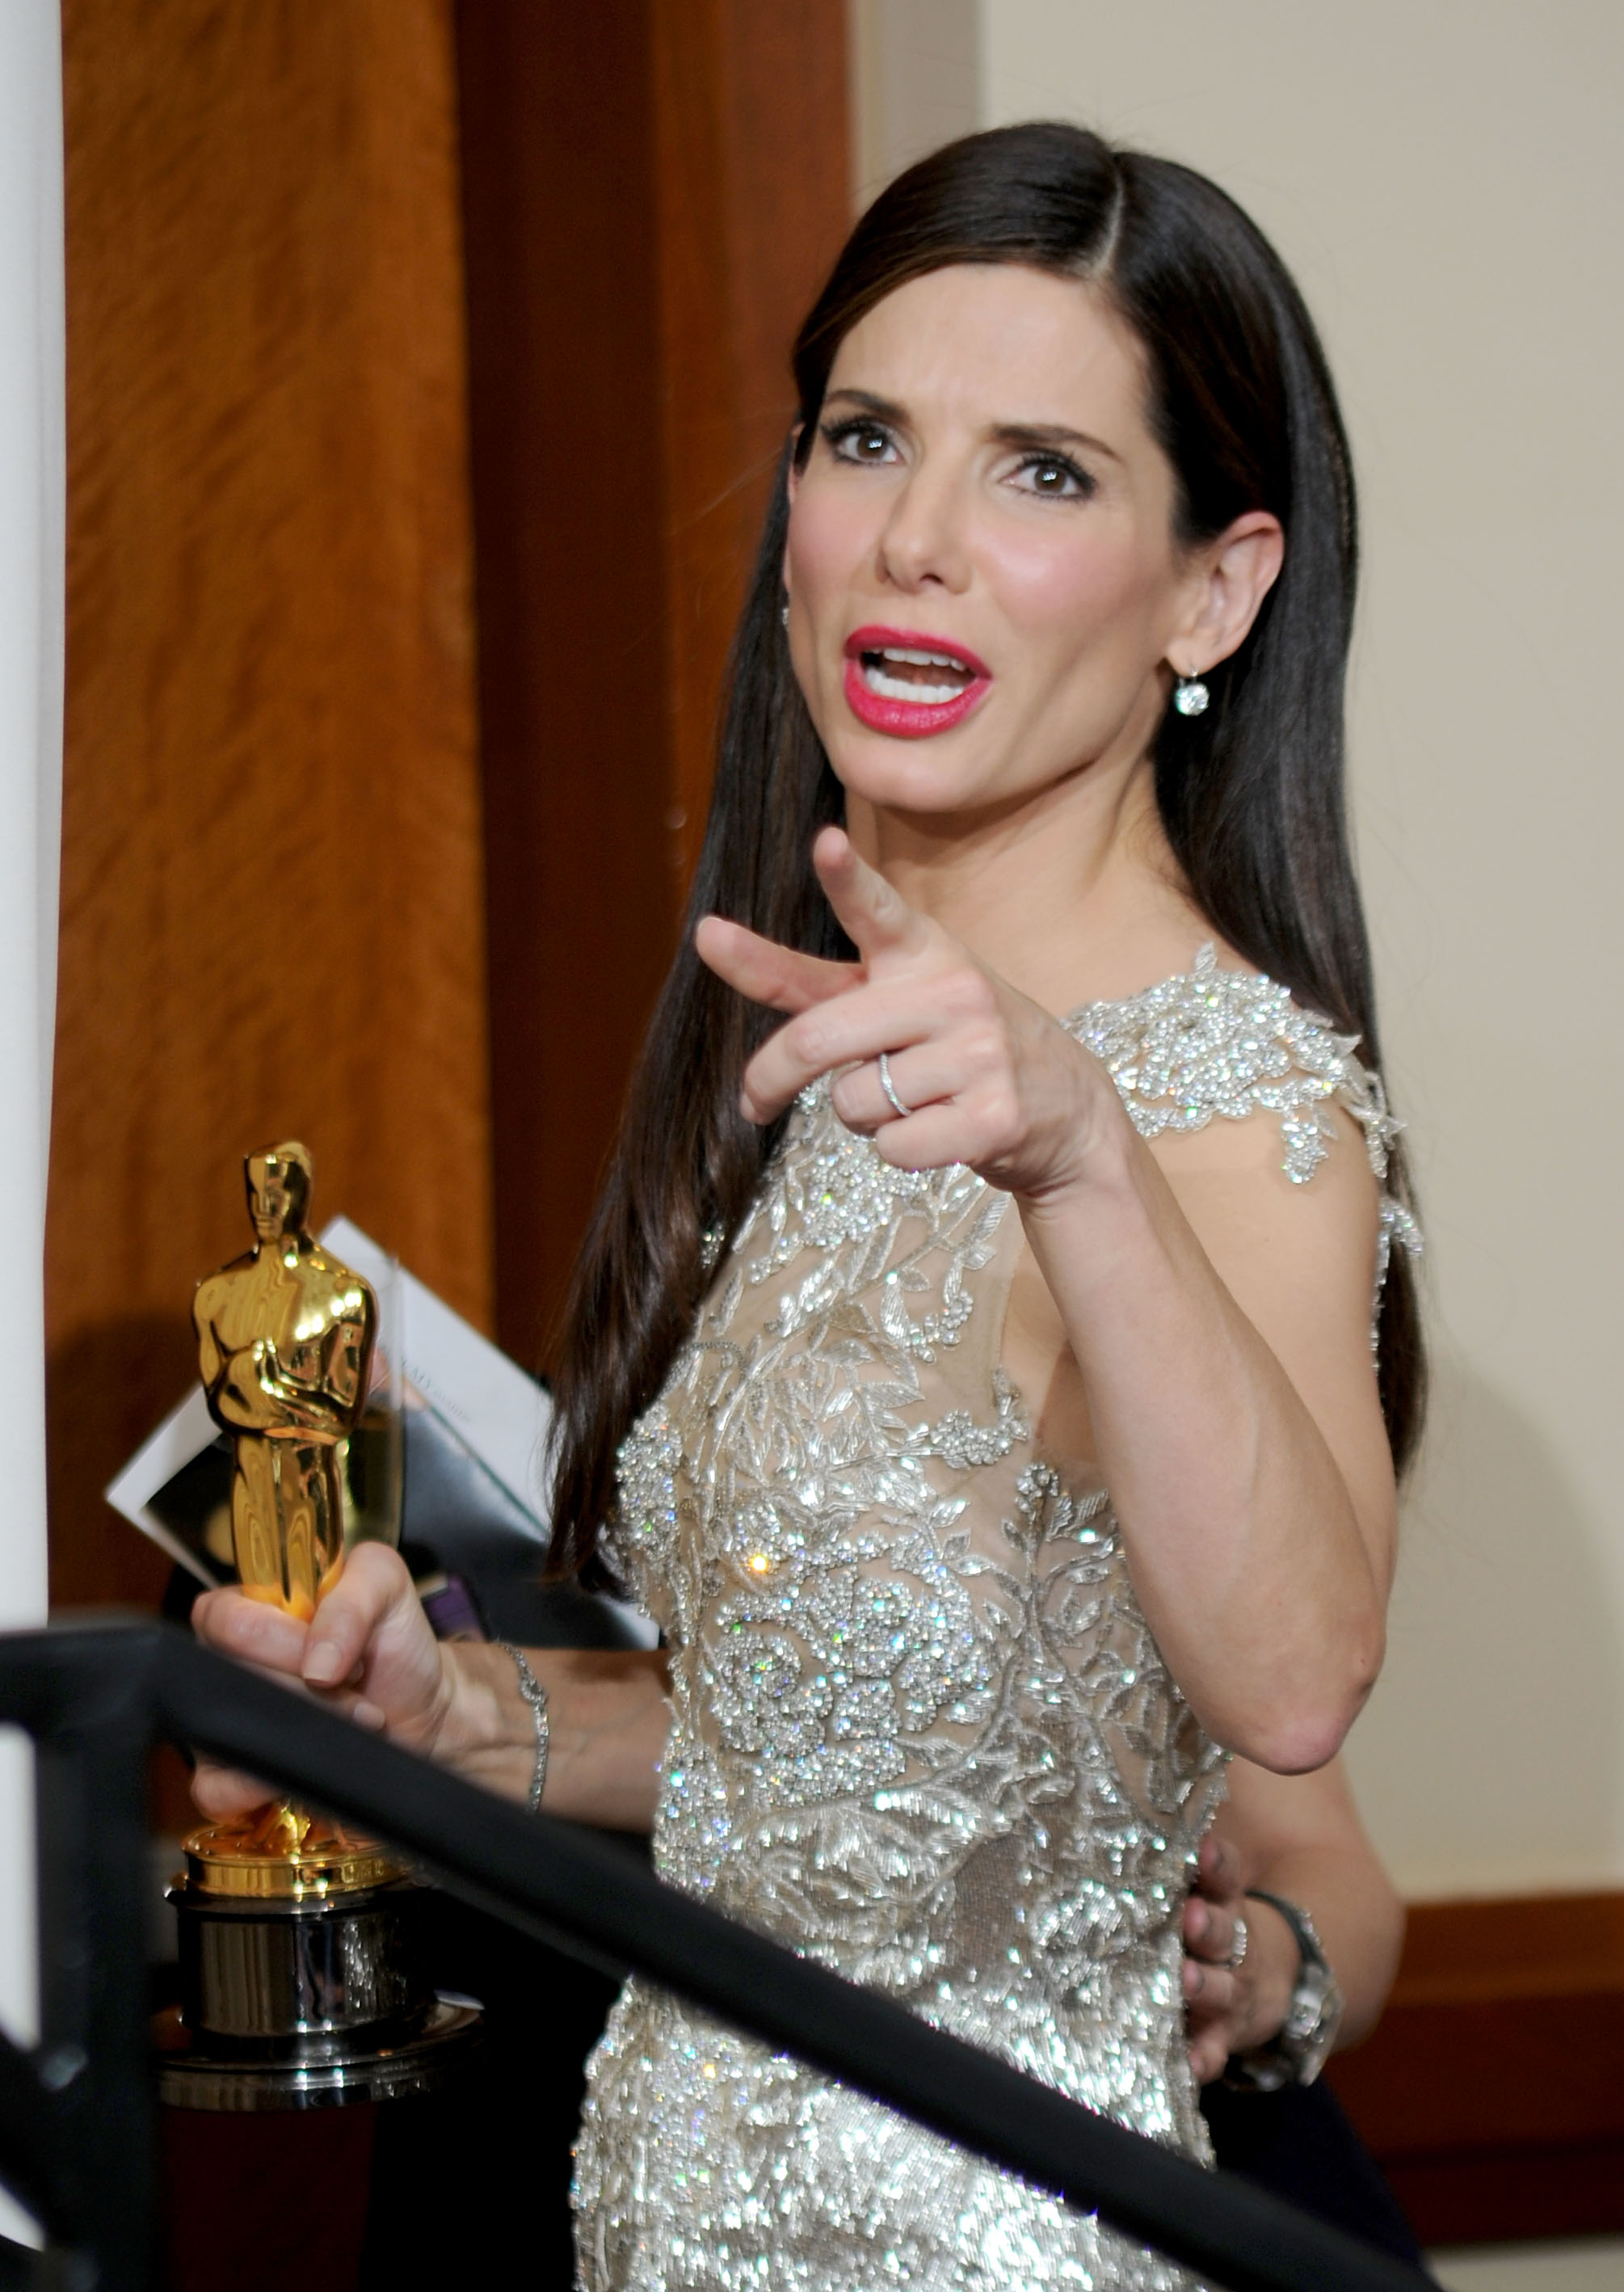 Sandra Bullock poses with her award on March 7, 2010 in Hollywood, California | Source: Getty Images